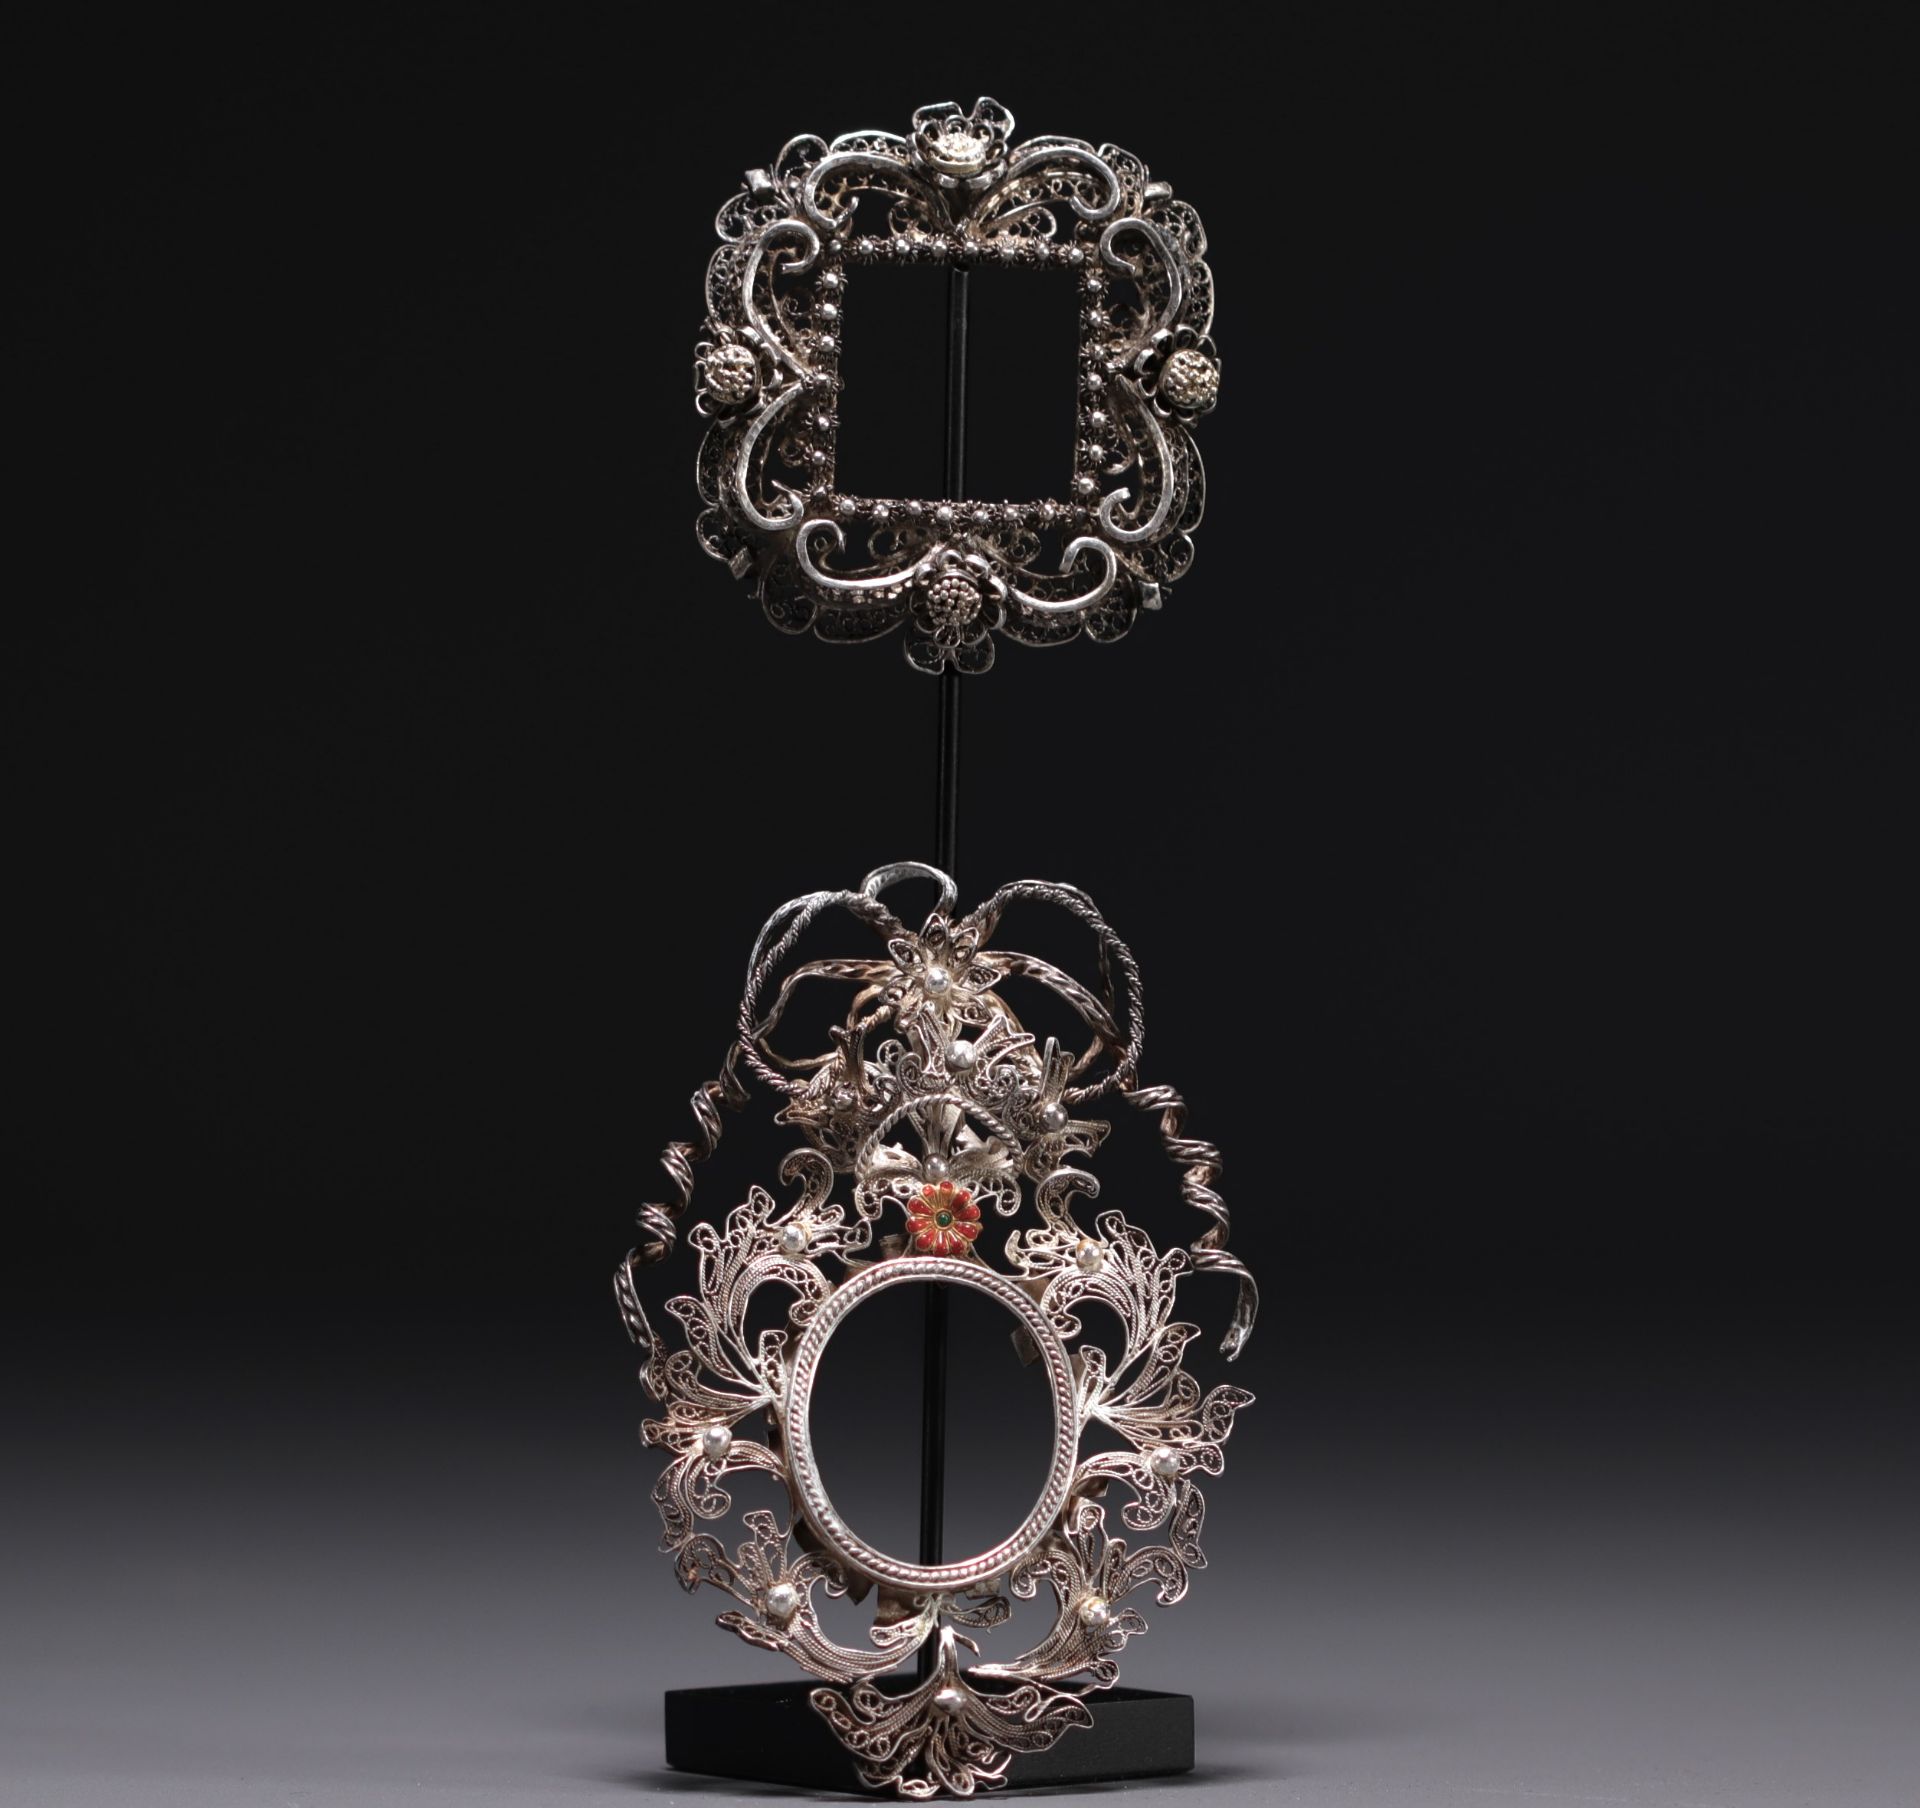 Set of two small filigree silver frames, Russia, 18th century.